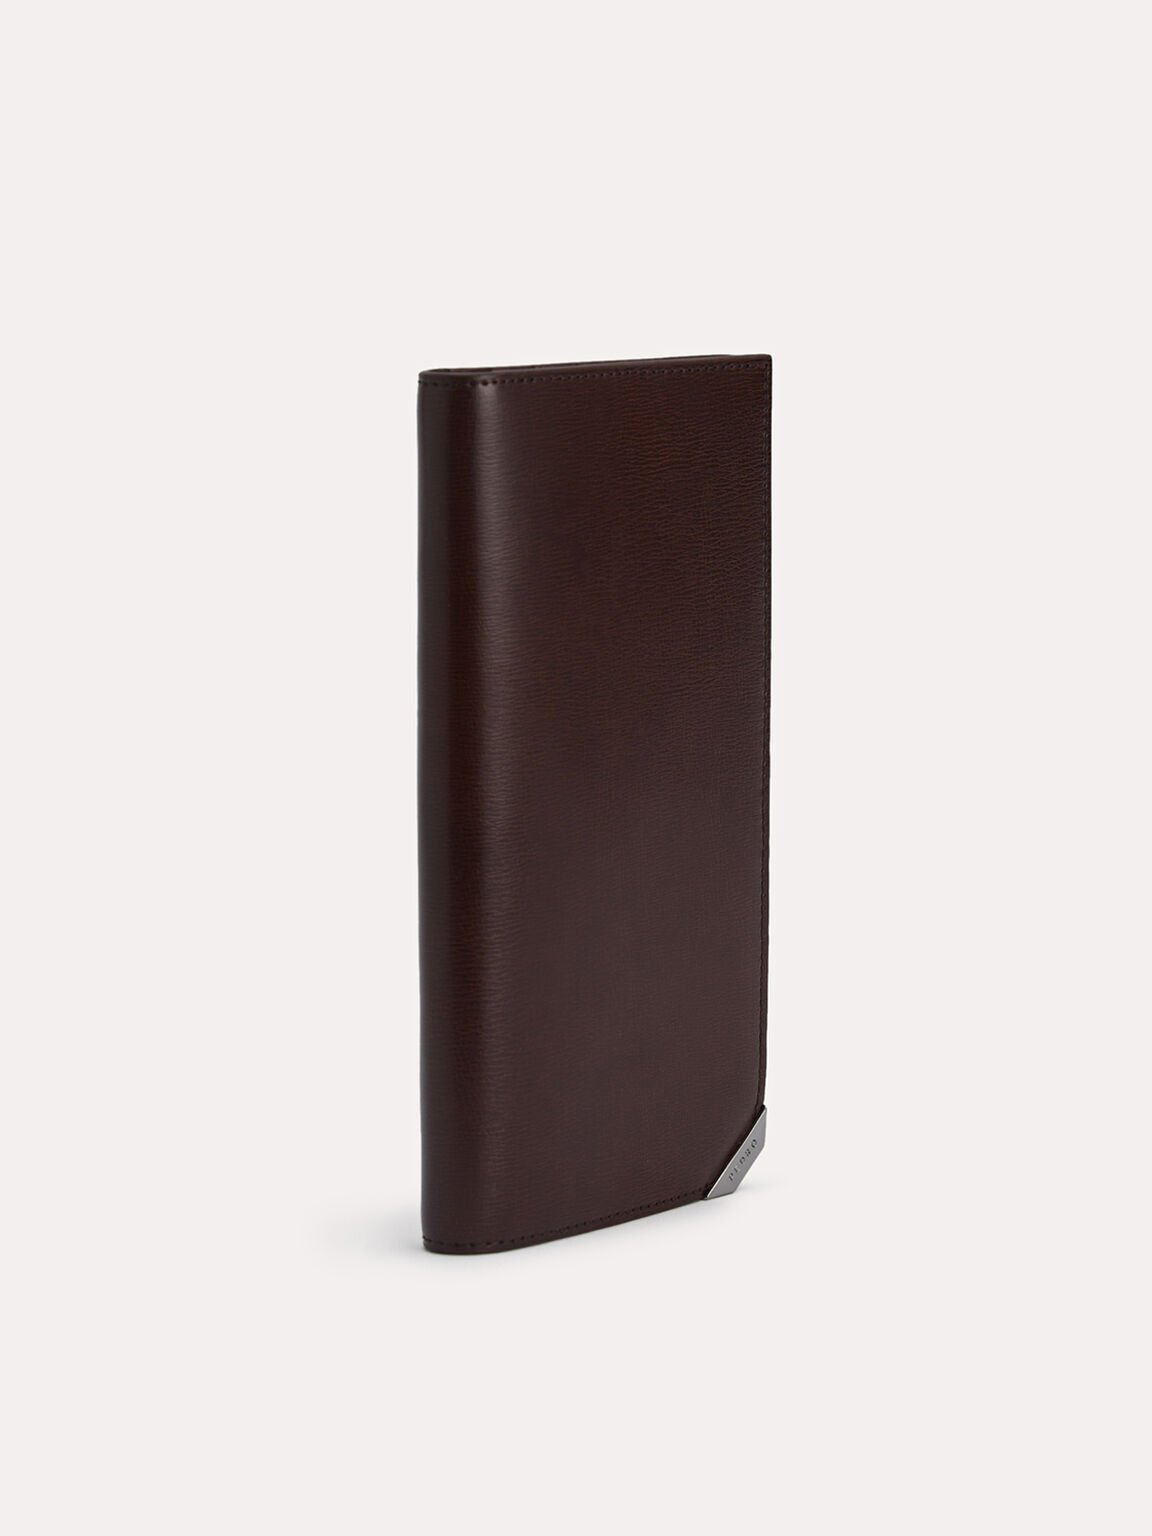 Long Textured Leather Wallet, Brown